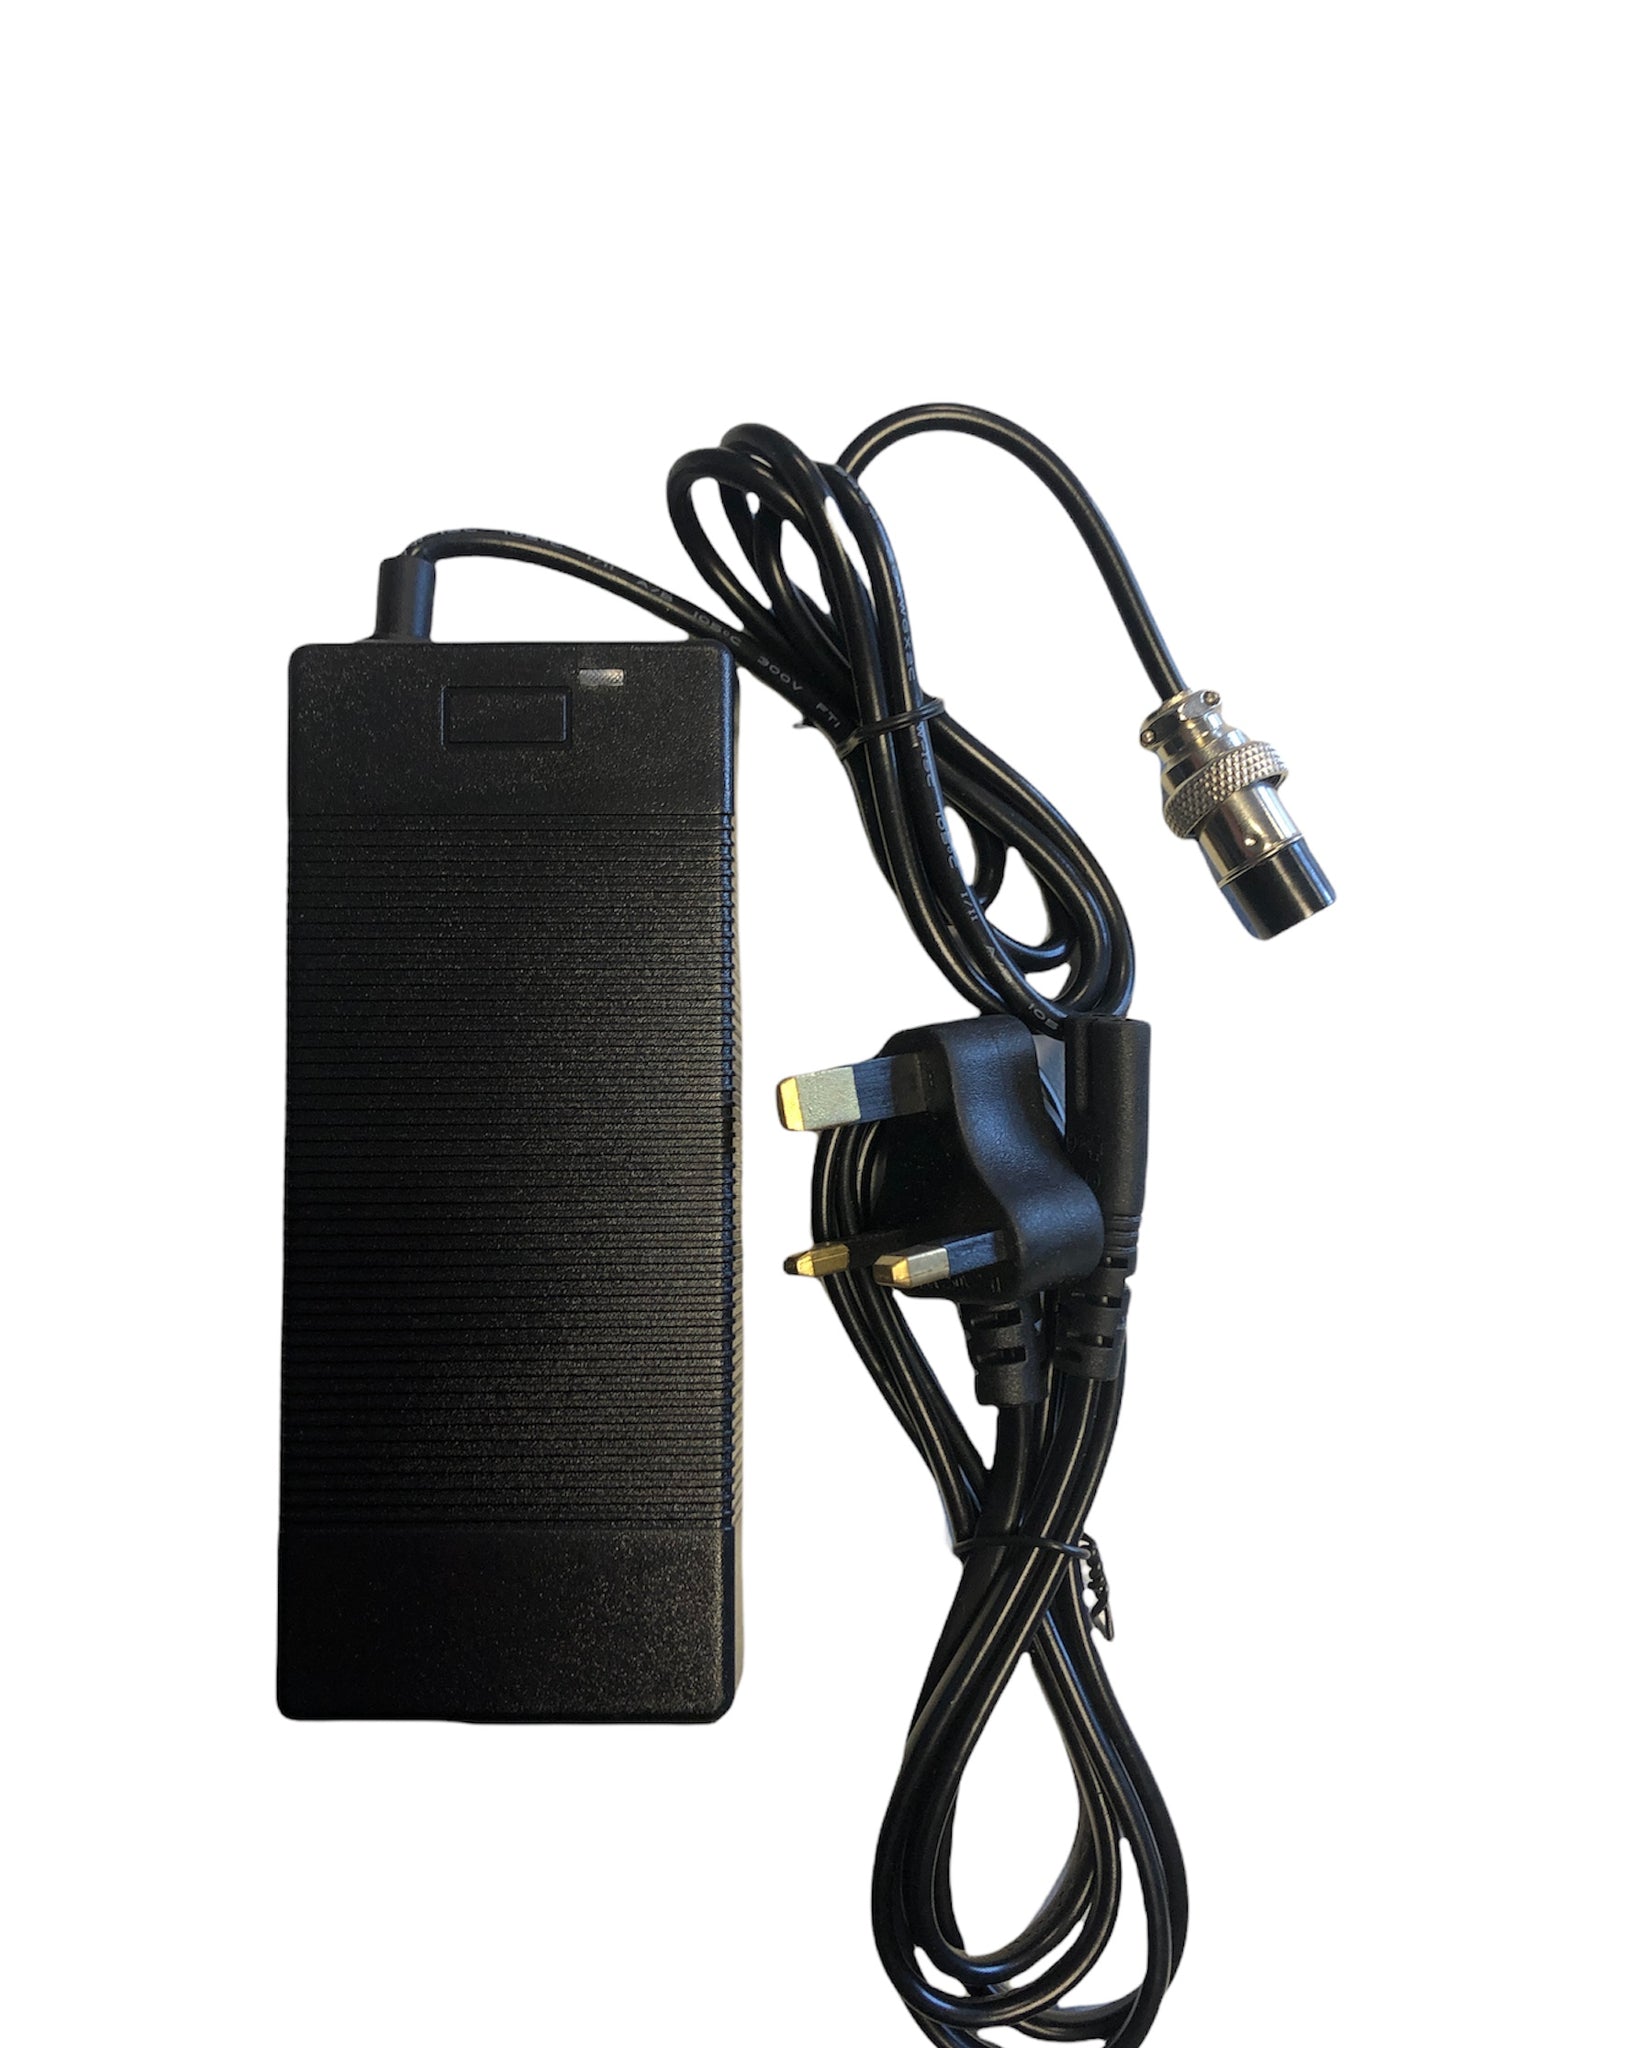 Electric Scooter Charger, 42V 2A Battery Charger, For Professional